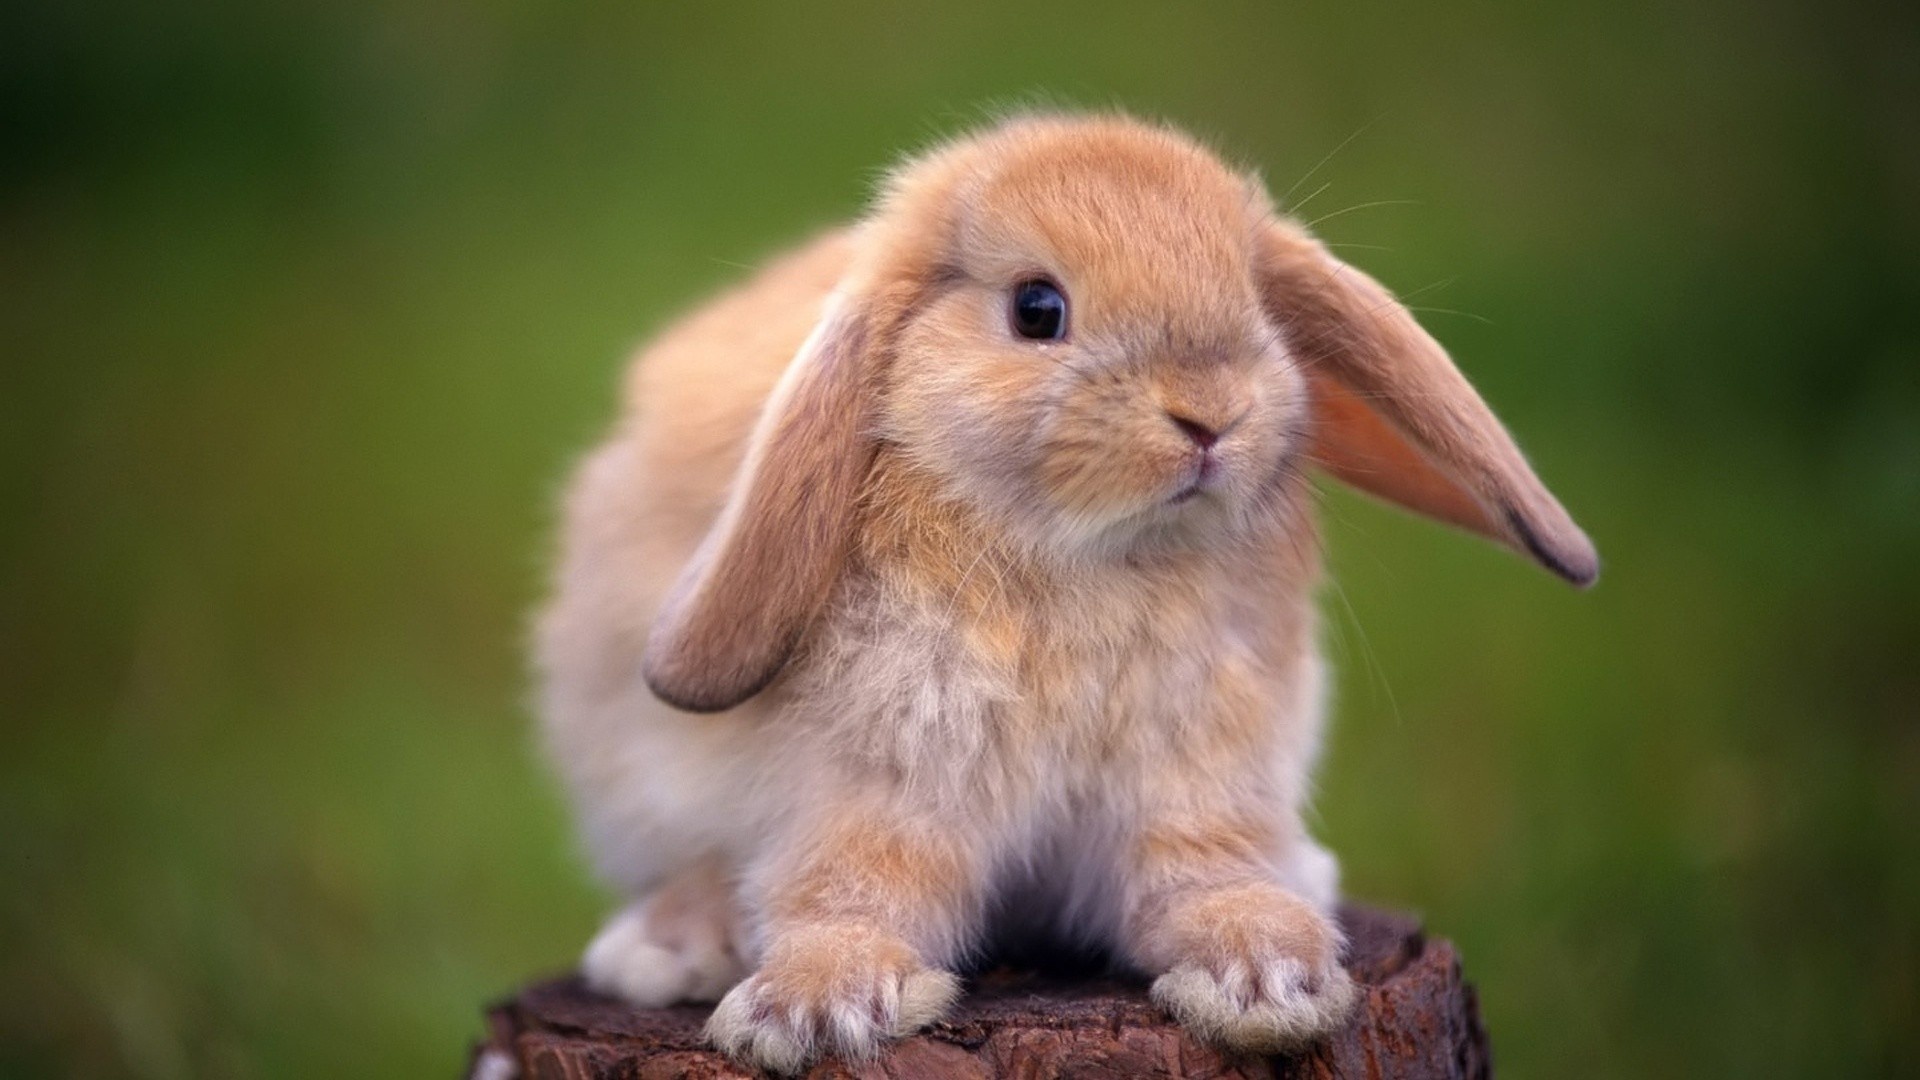 Bunny: Holland Lop, A breed of rabbit that was recognized by the American Rabbit Breeders Association in 1979. 1920x1080 Full HD Wallpaper.